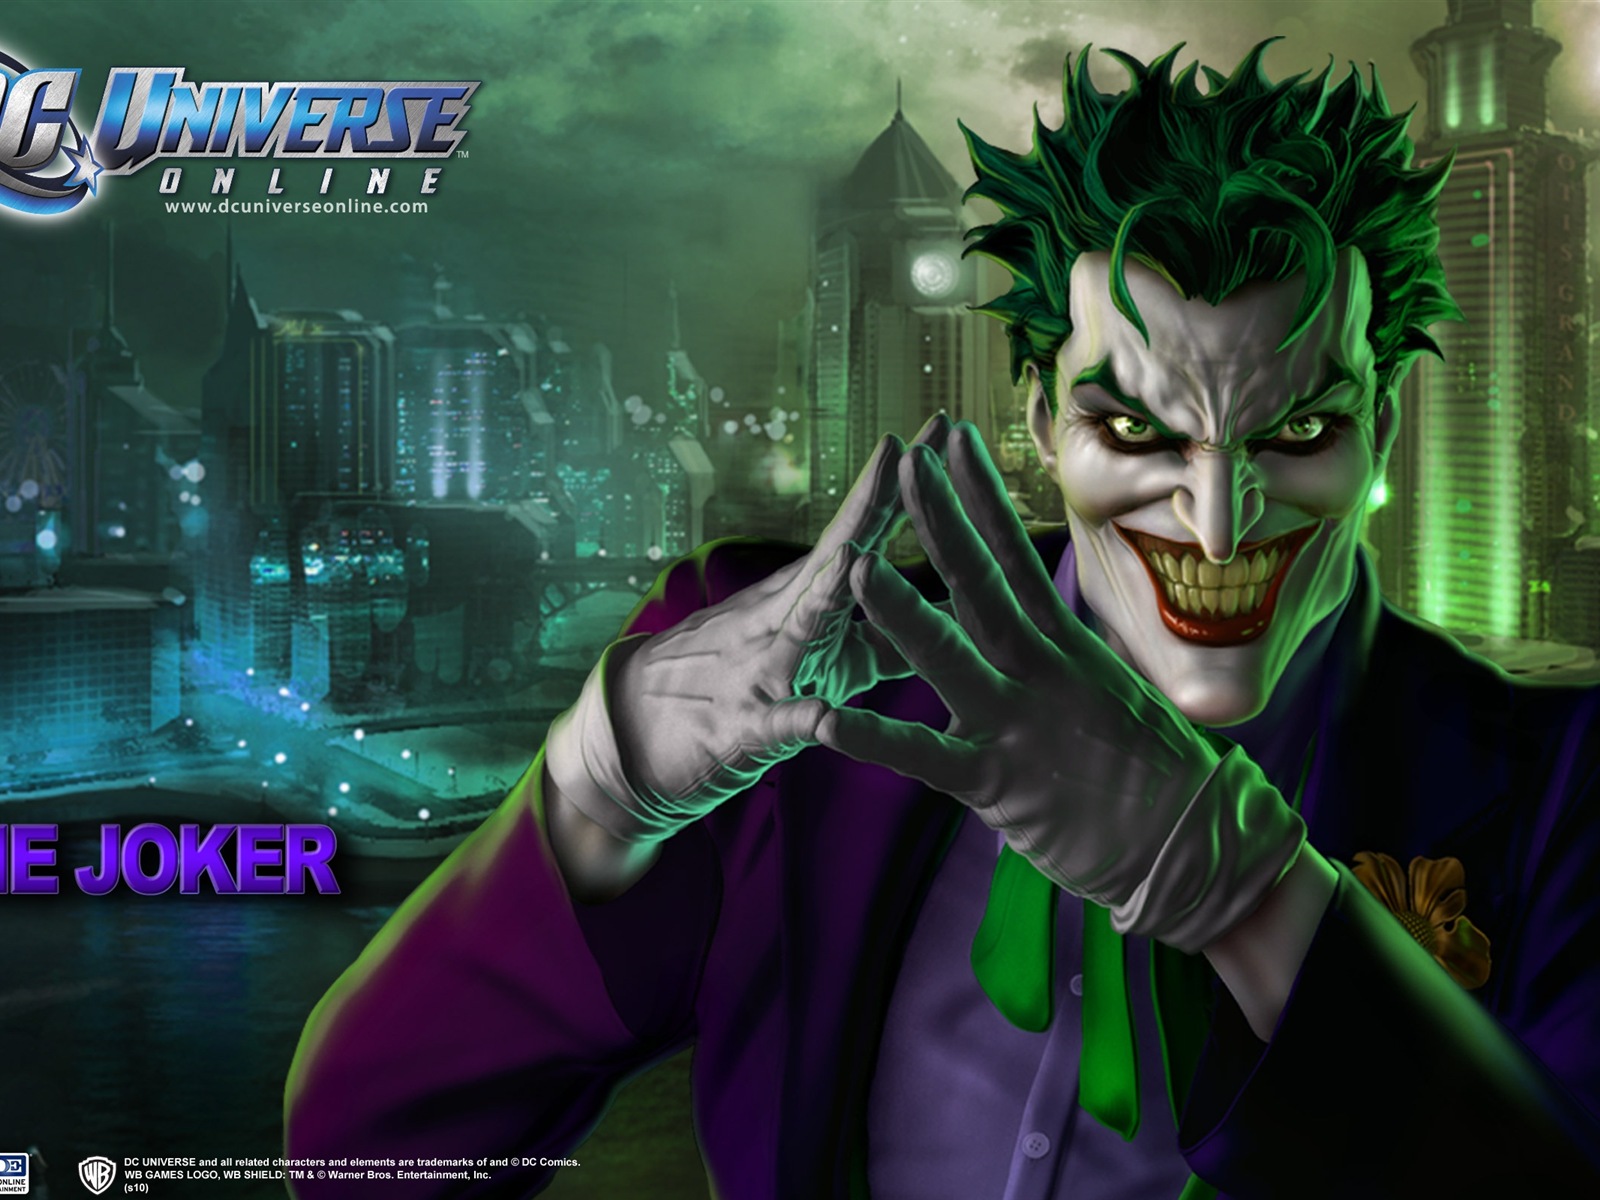 DC Universe Online HD game wallpapers #11 - 1600x1200